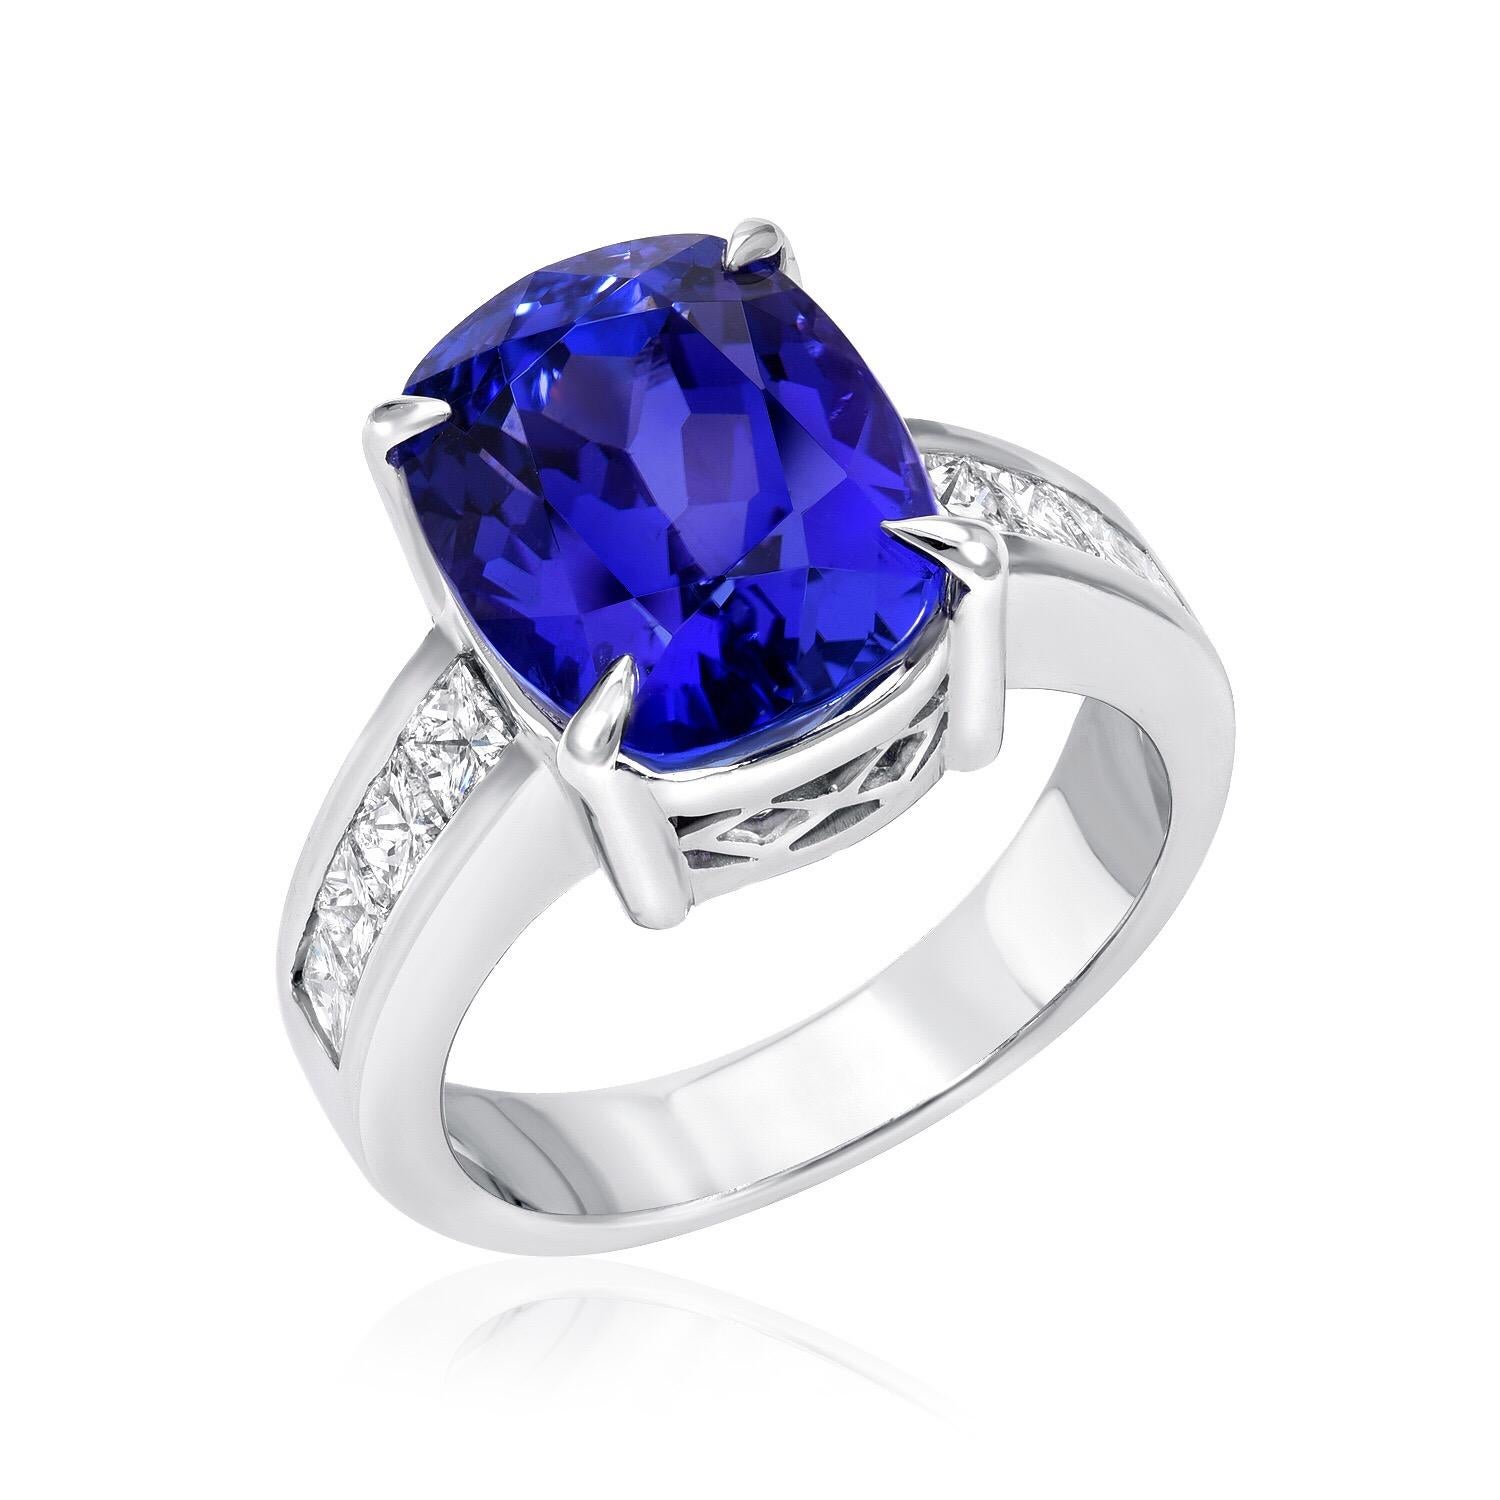 Spectacular 6.80 carat cushion cut Tanzanite, set in a 18K white gold ring for women, adorned by a total of 0.65 carat princess cut diamonds.
Ring size 5.5. Re-sizing is complementary upon request.
Returns are accepted and paid by us within 7 days